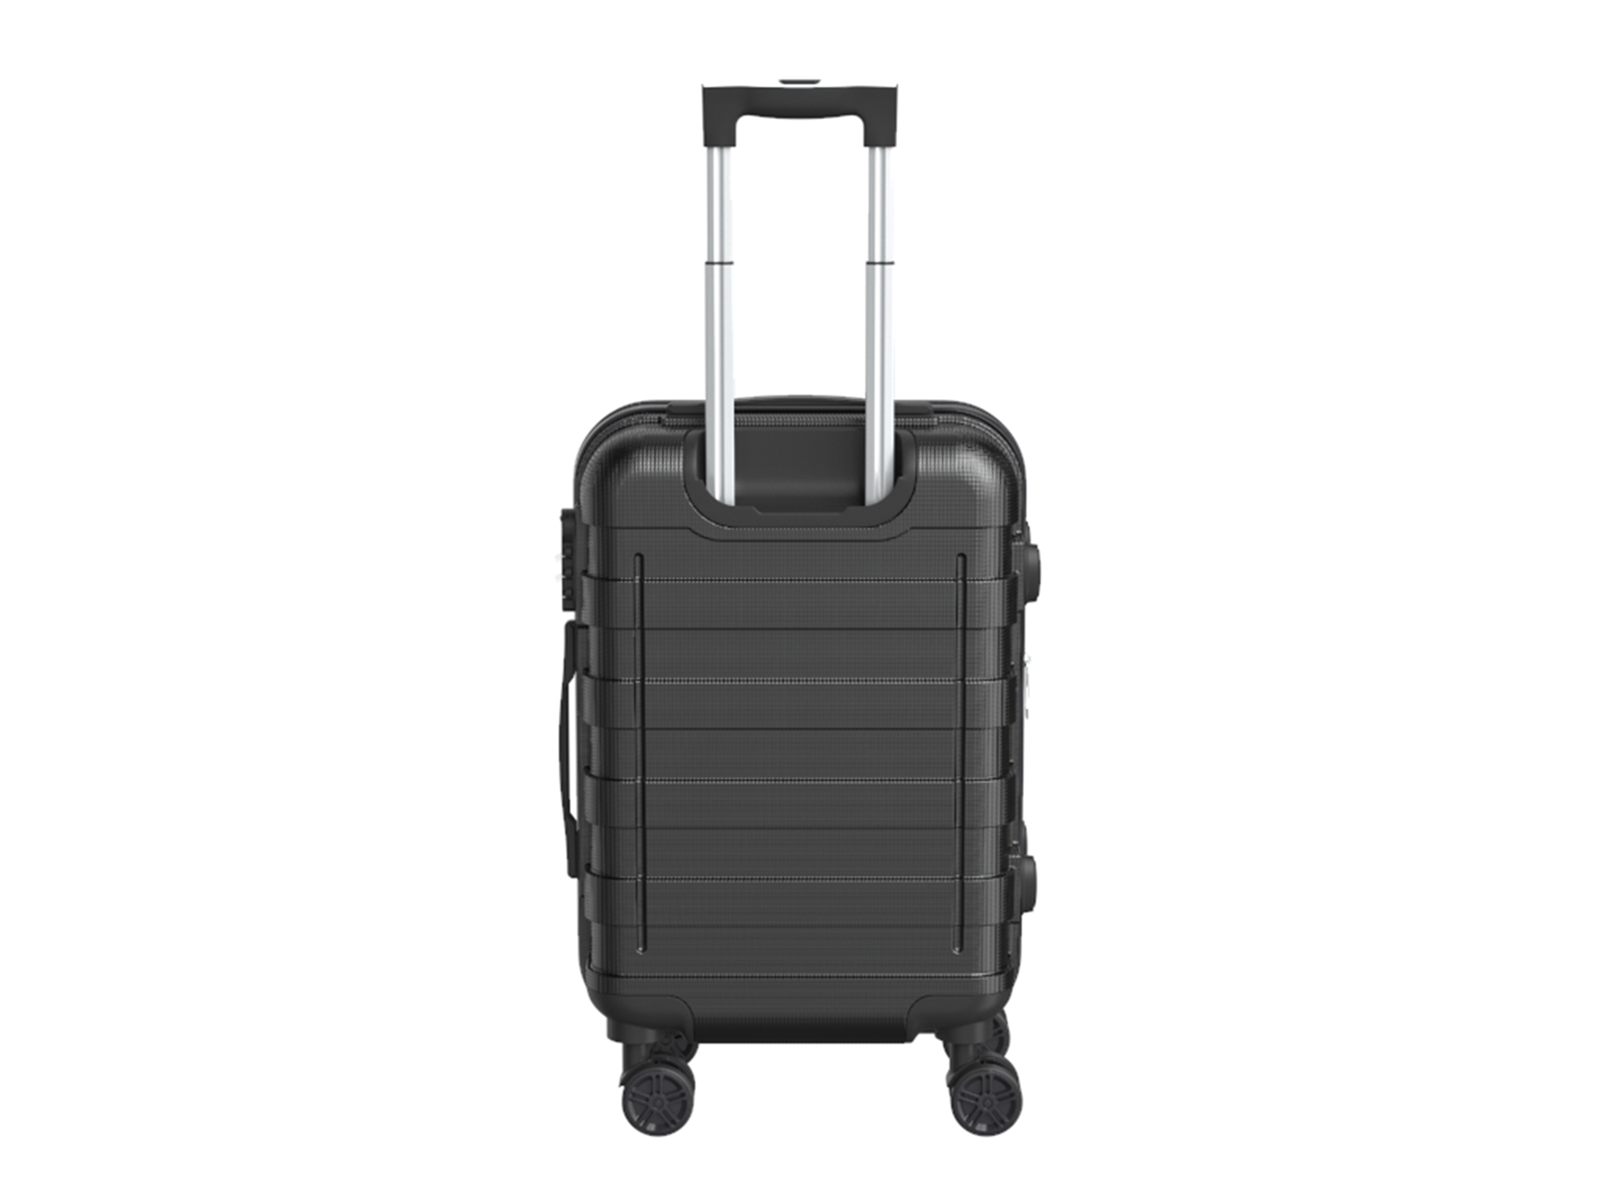 familiar 22 inch/55 cm (Expandable) Small Check - in luggage